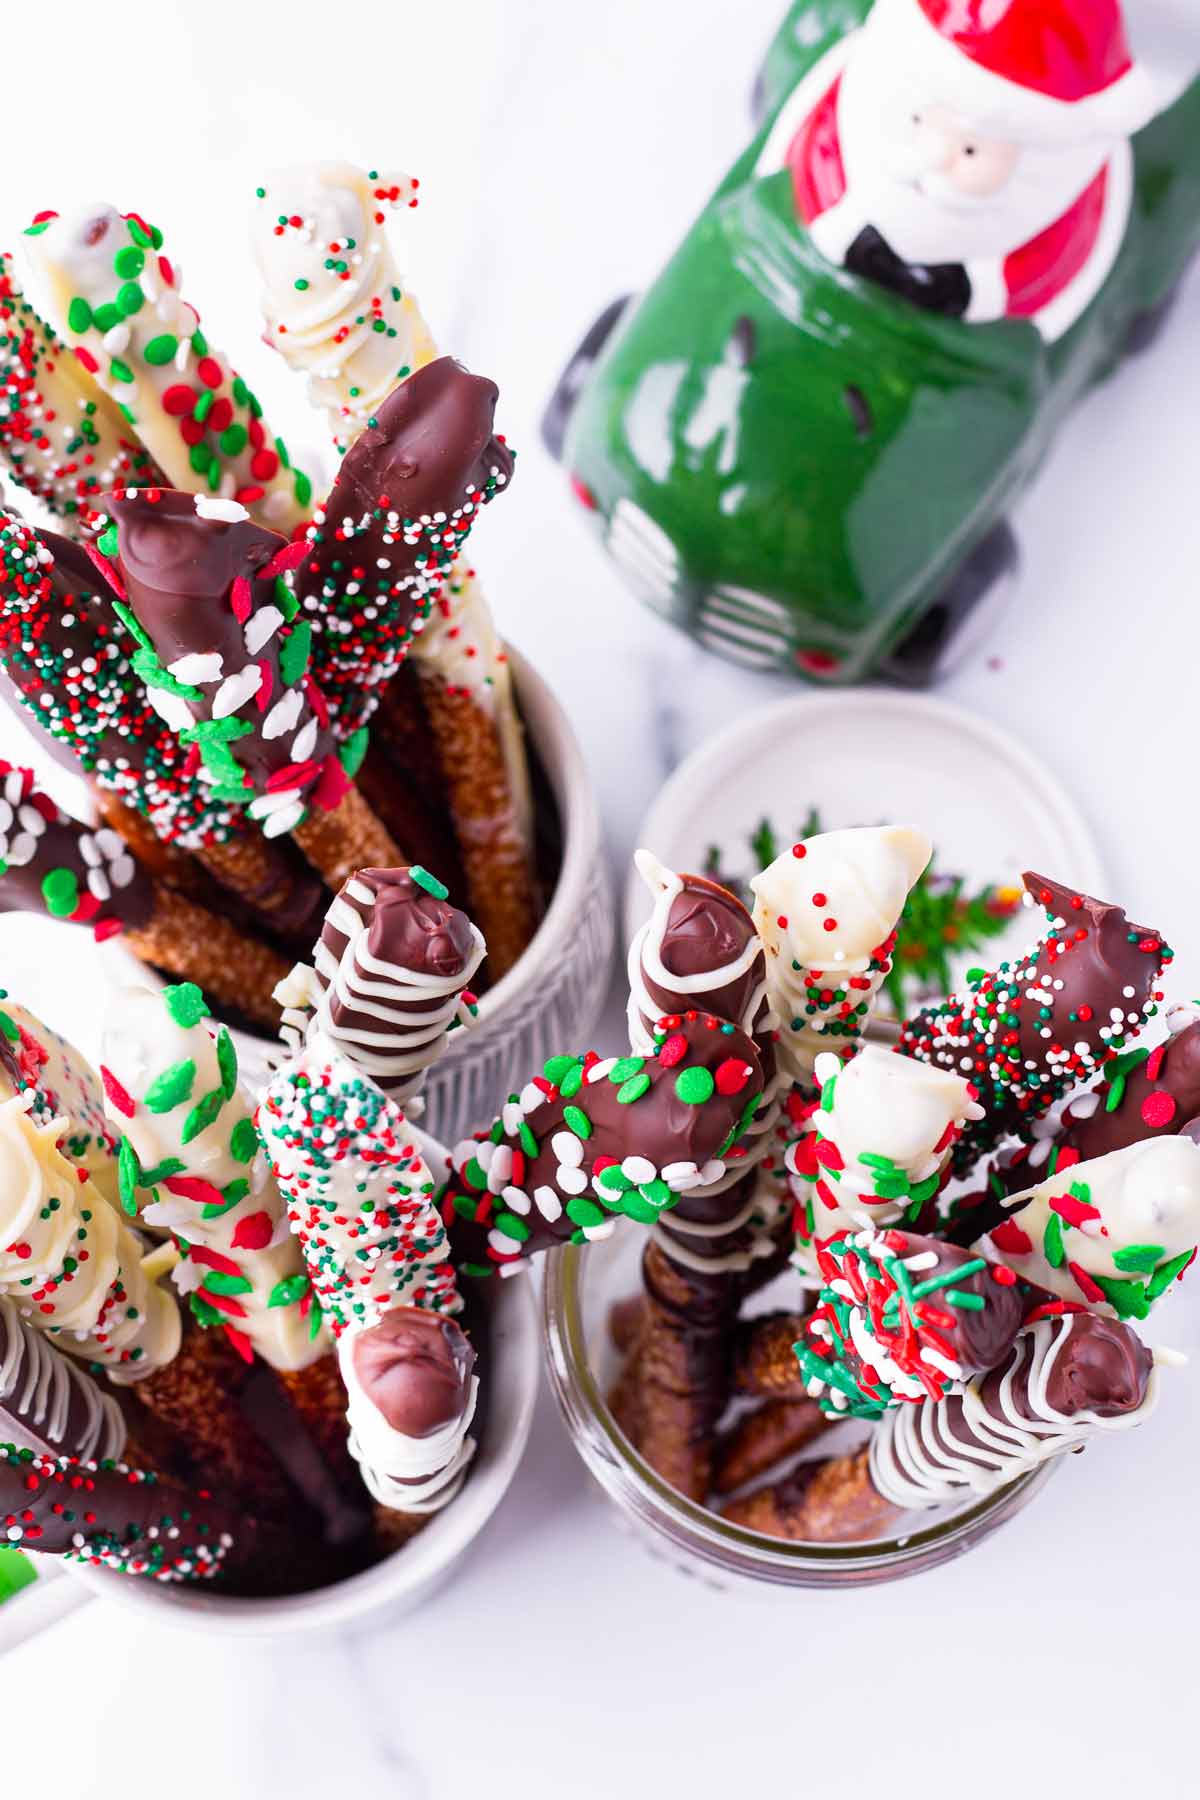 top view of chocolate pretzel rods with holiday sprinkles